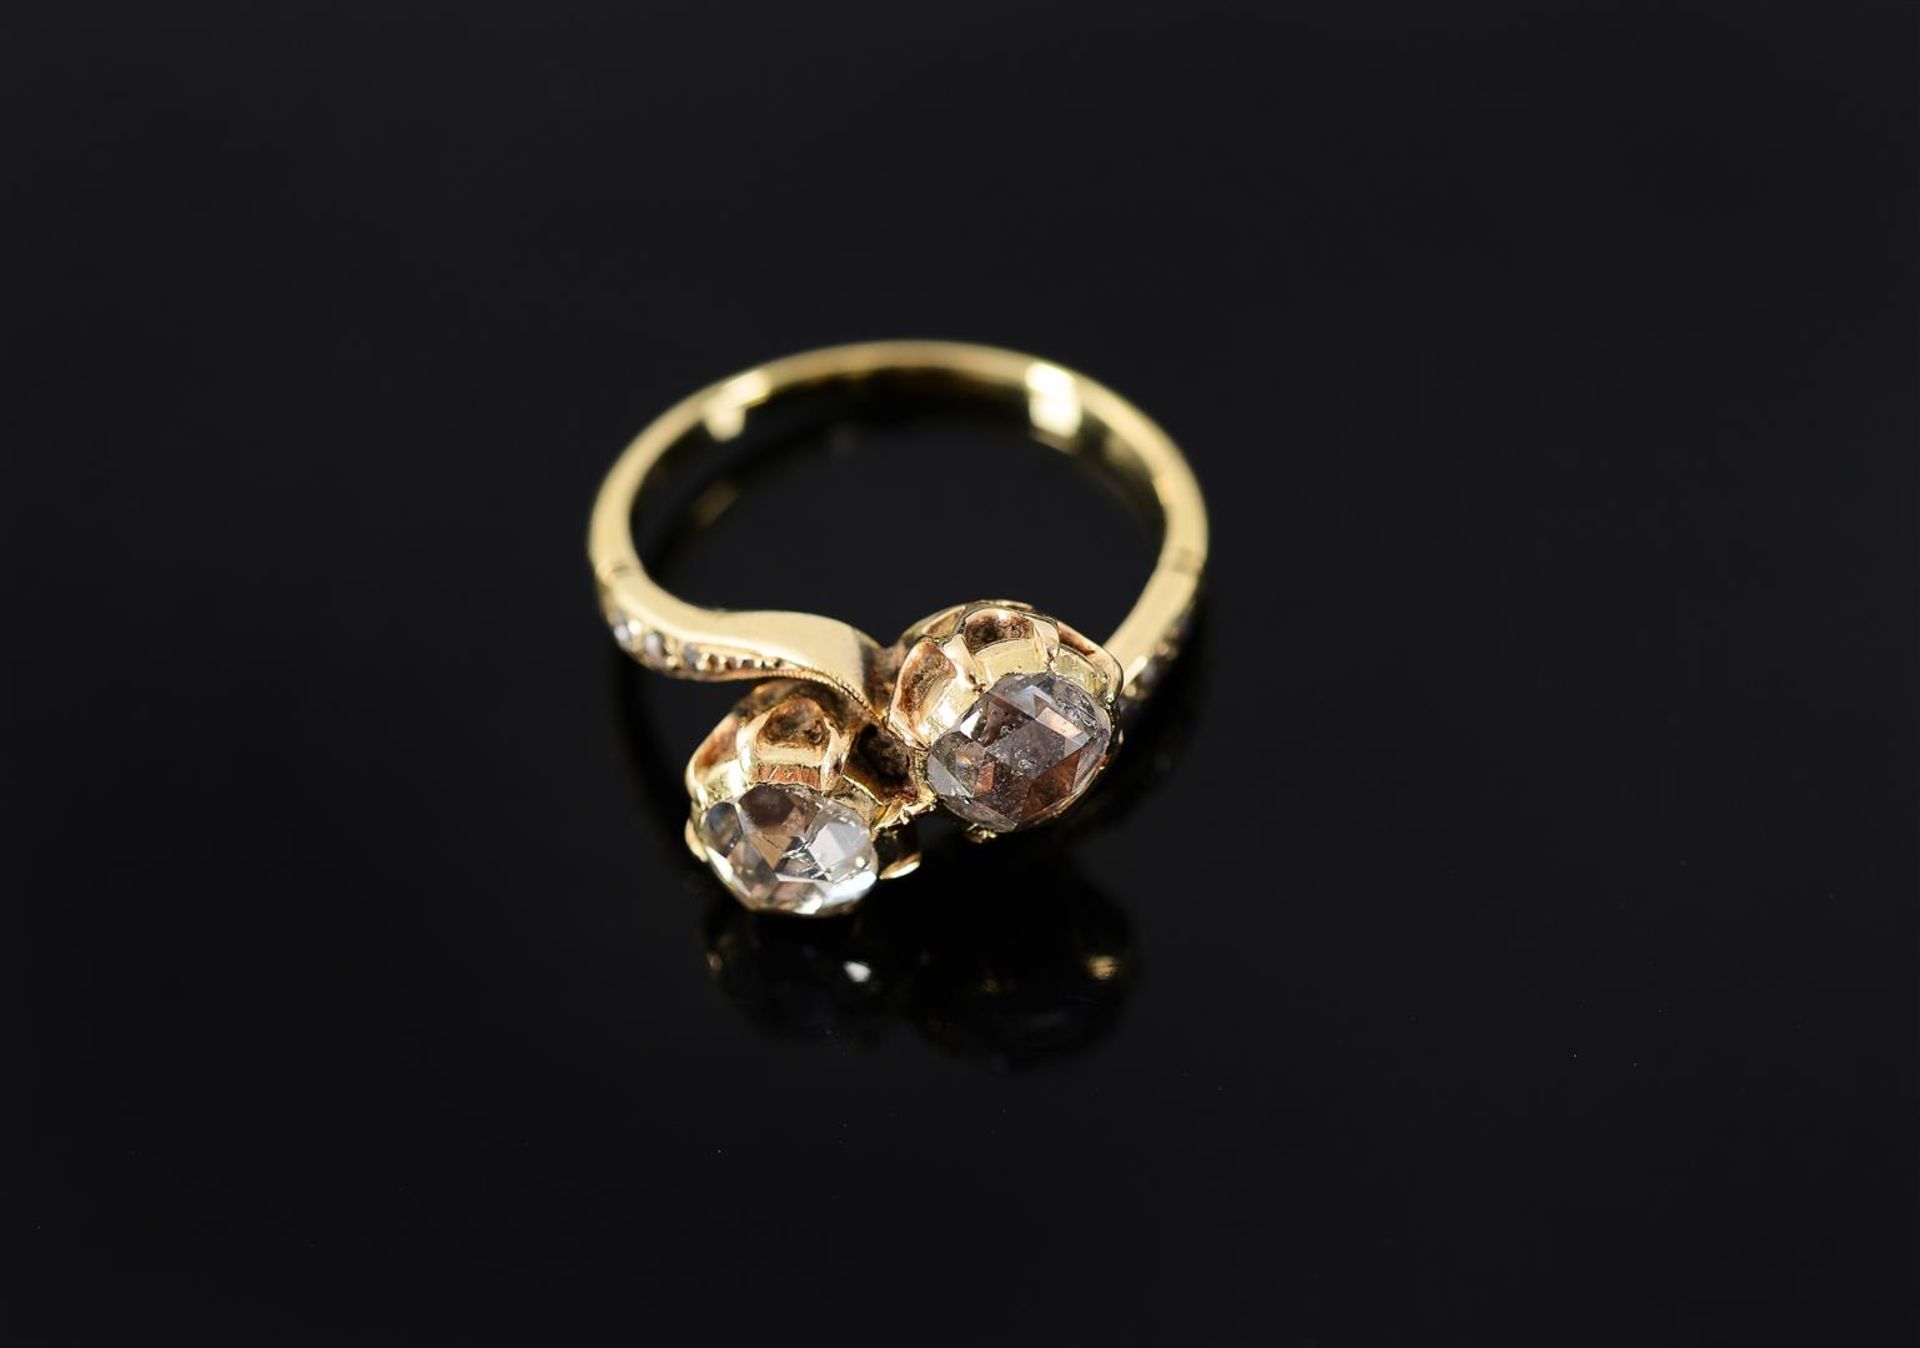 A 14-kt golden ring with two rose cut diamonds and six small rose cut entourage diamonds. Size 51 an - Image 5 of 5